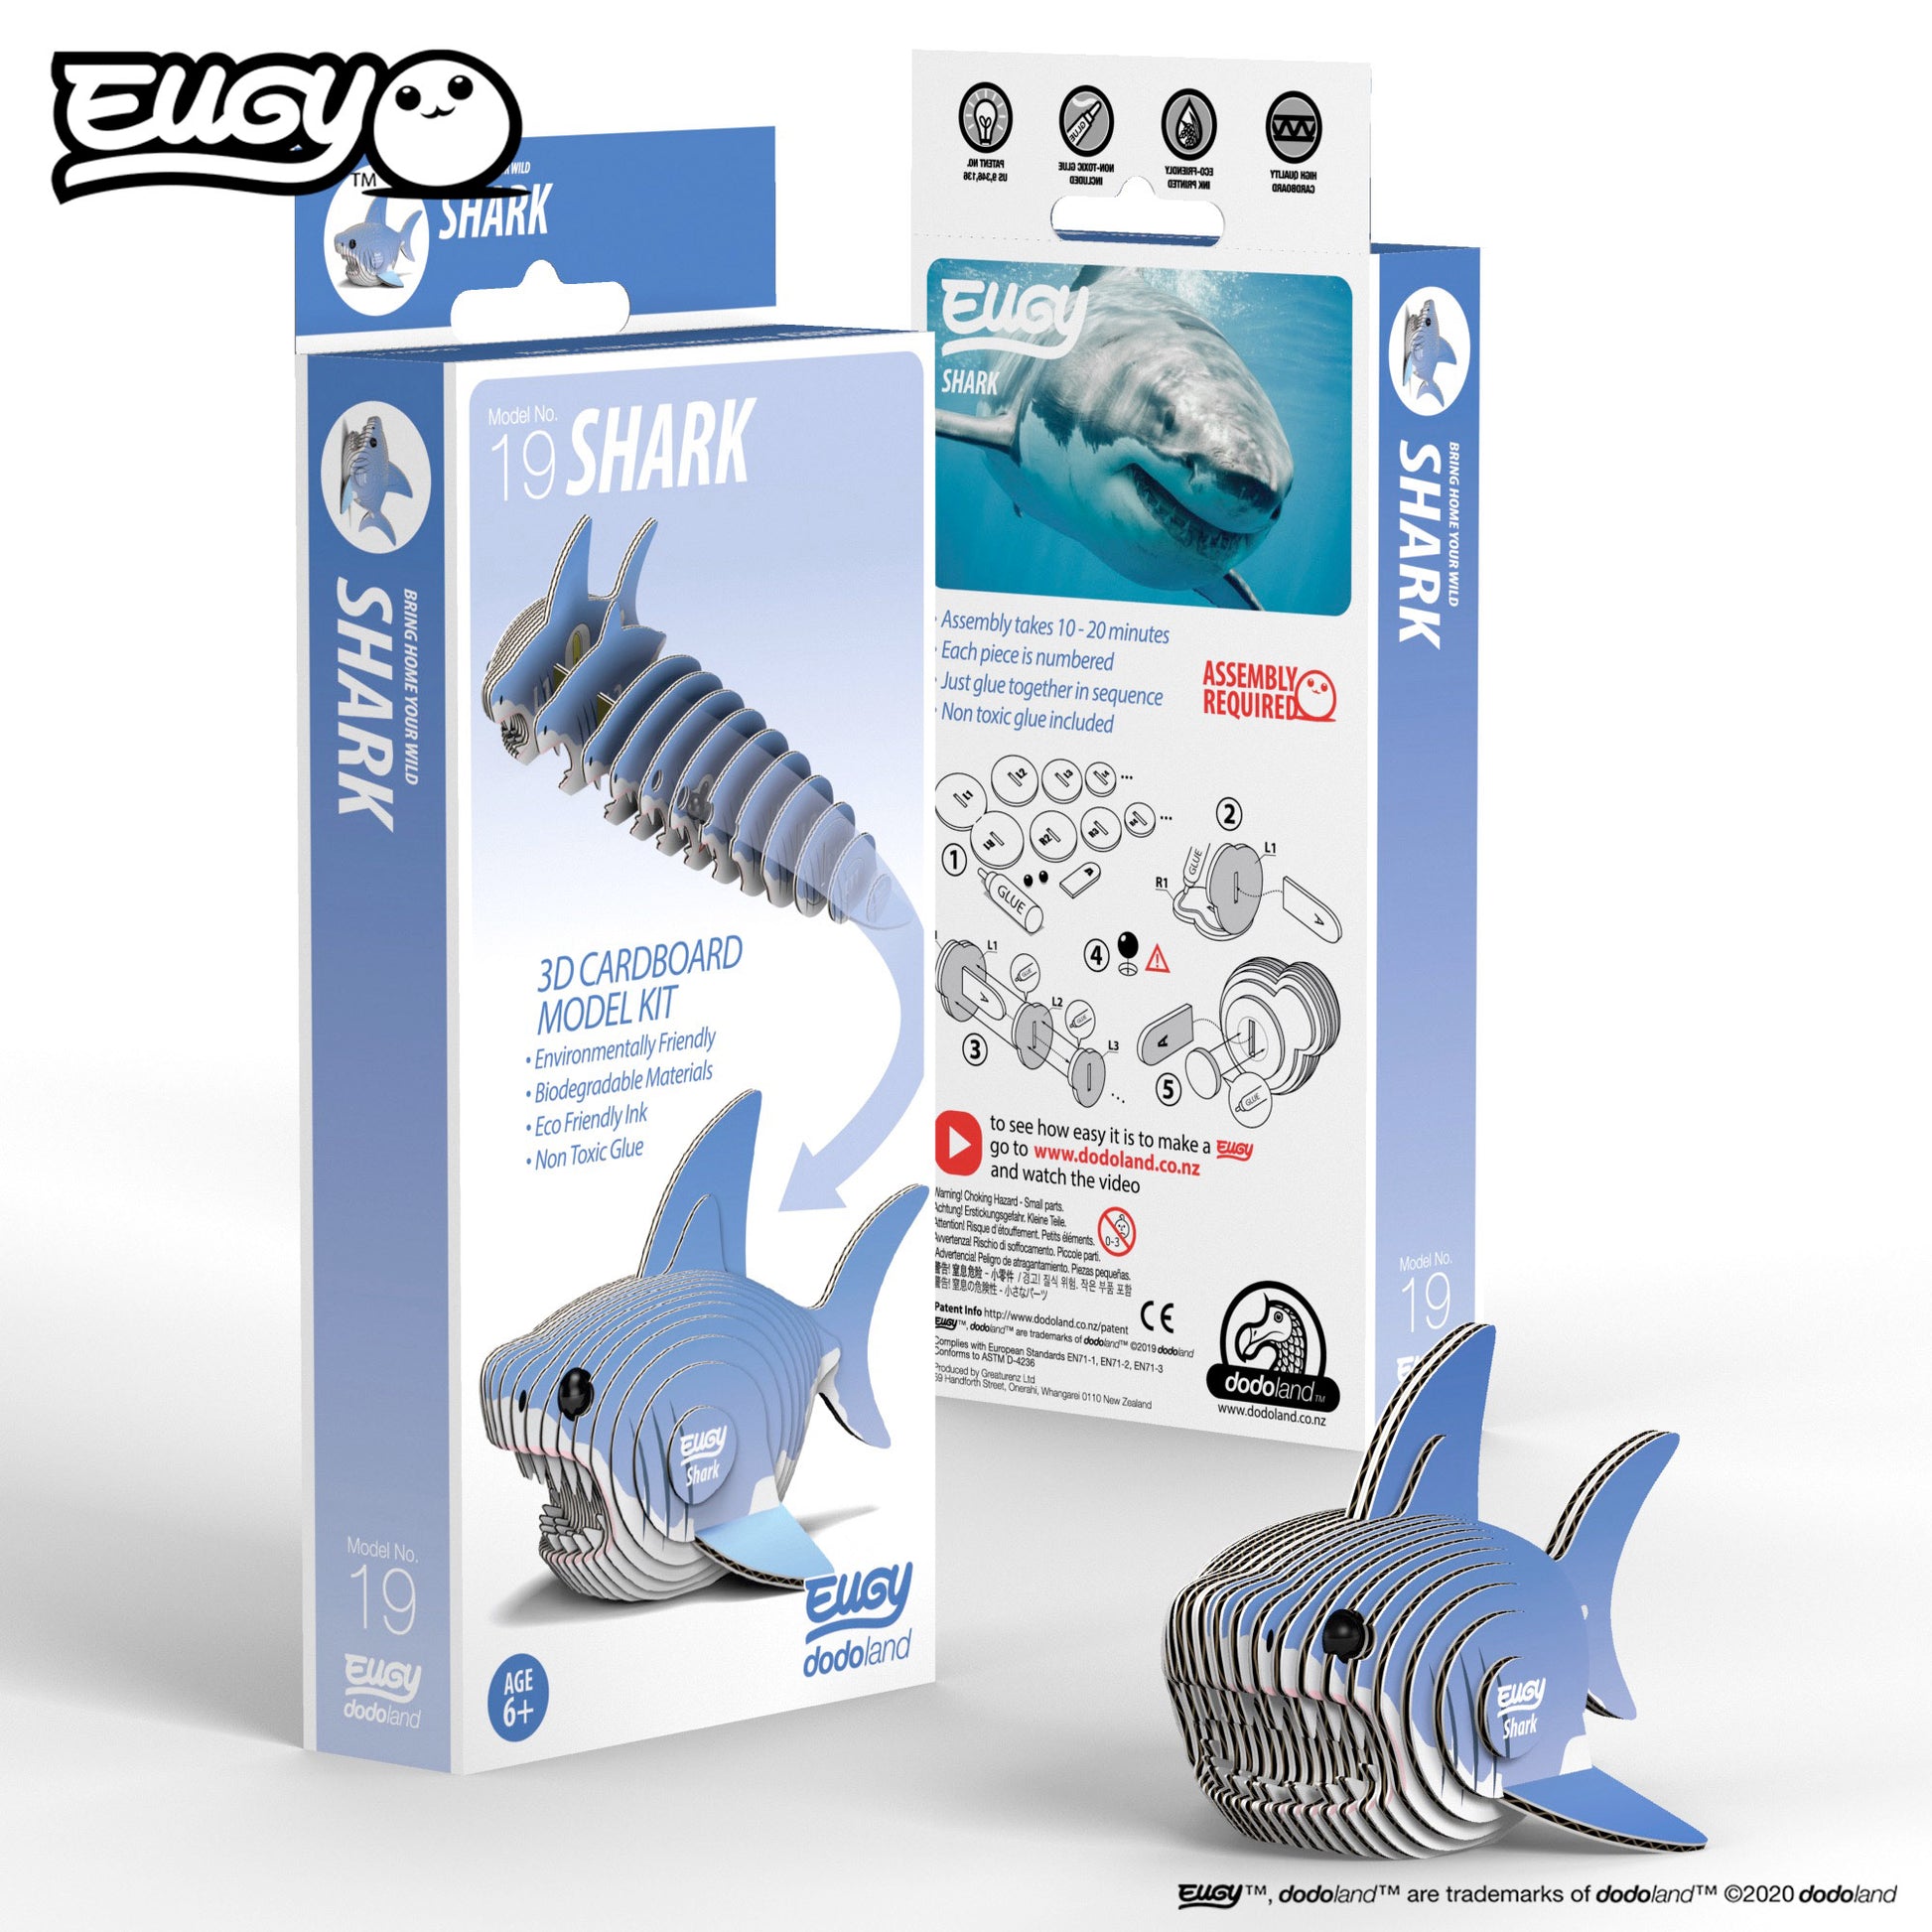 Dive into Adventure with a Shark 3D Puzzle by Eugy - 3D Shark ( 019 )